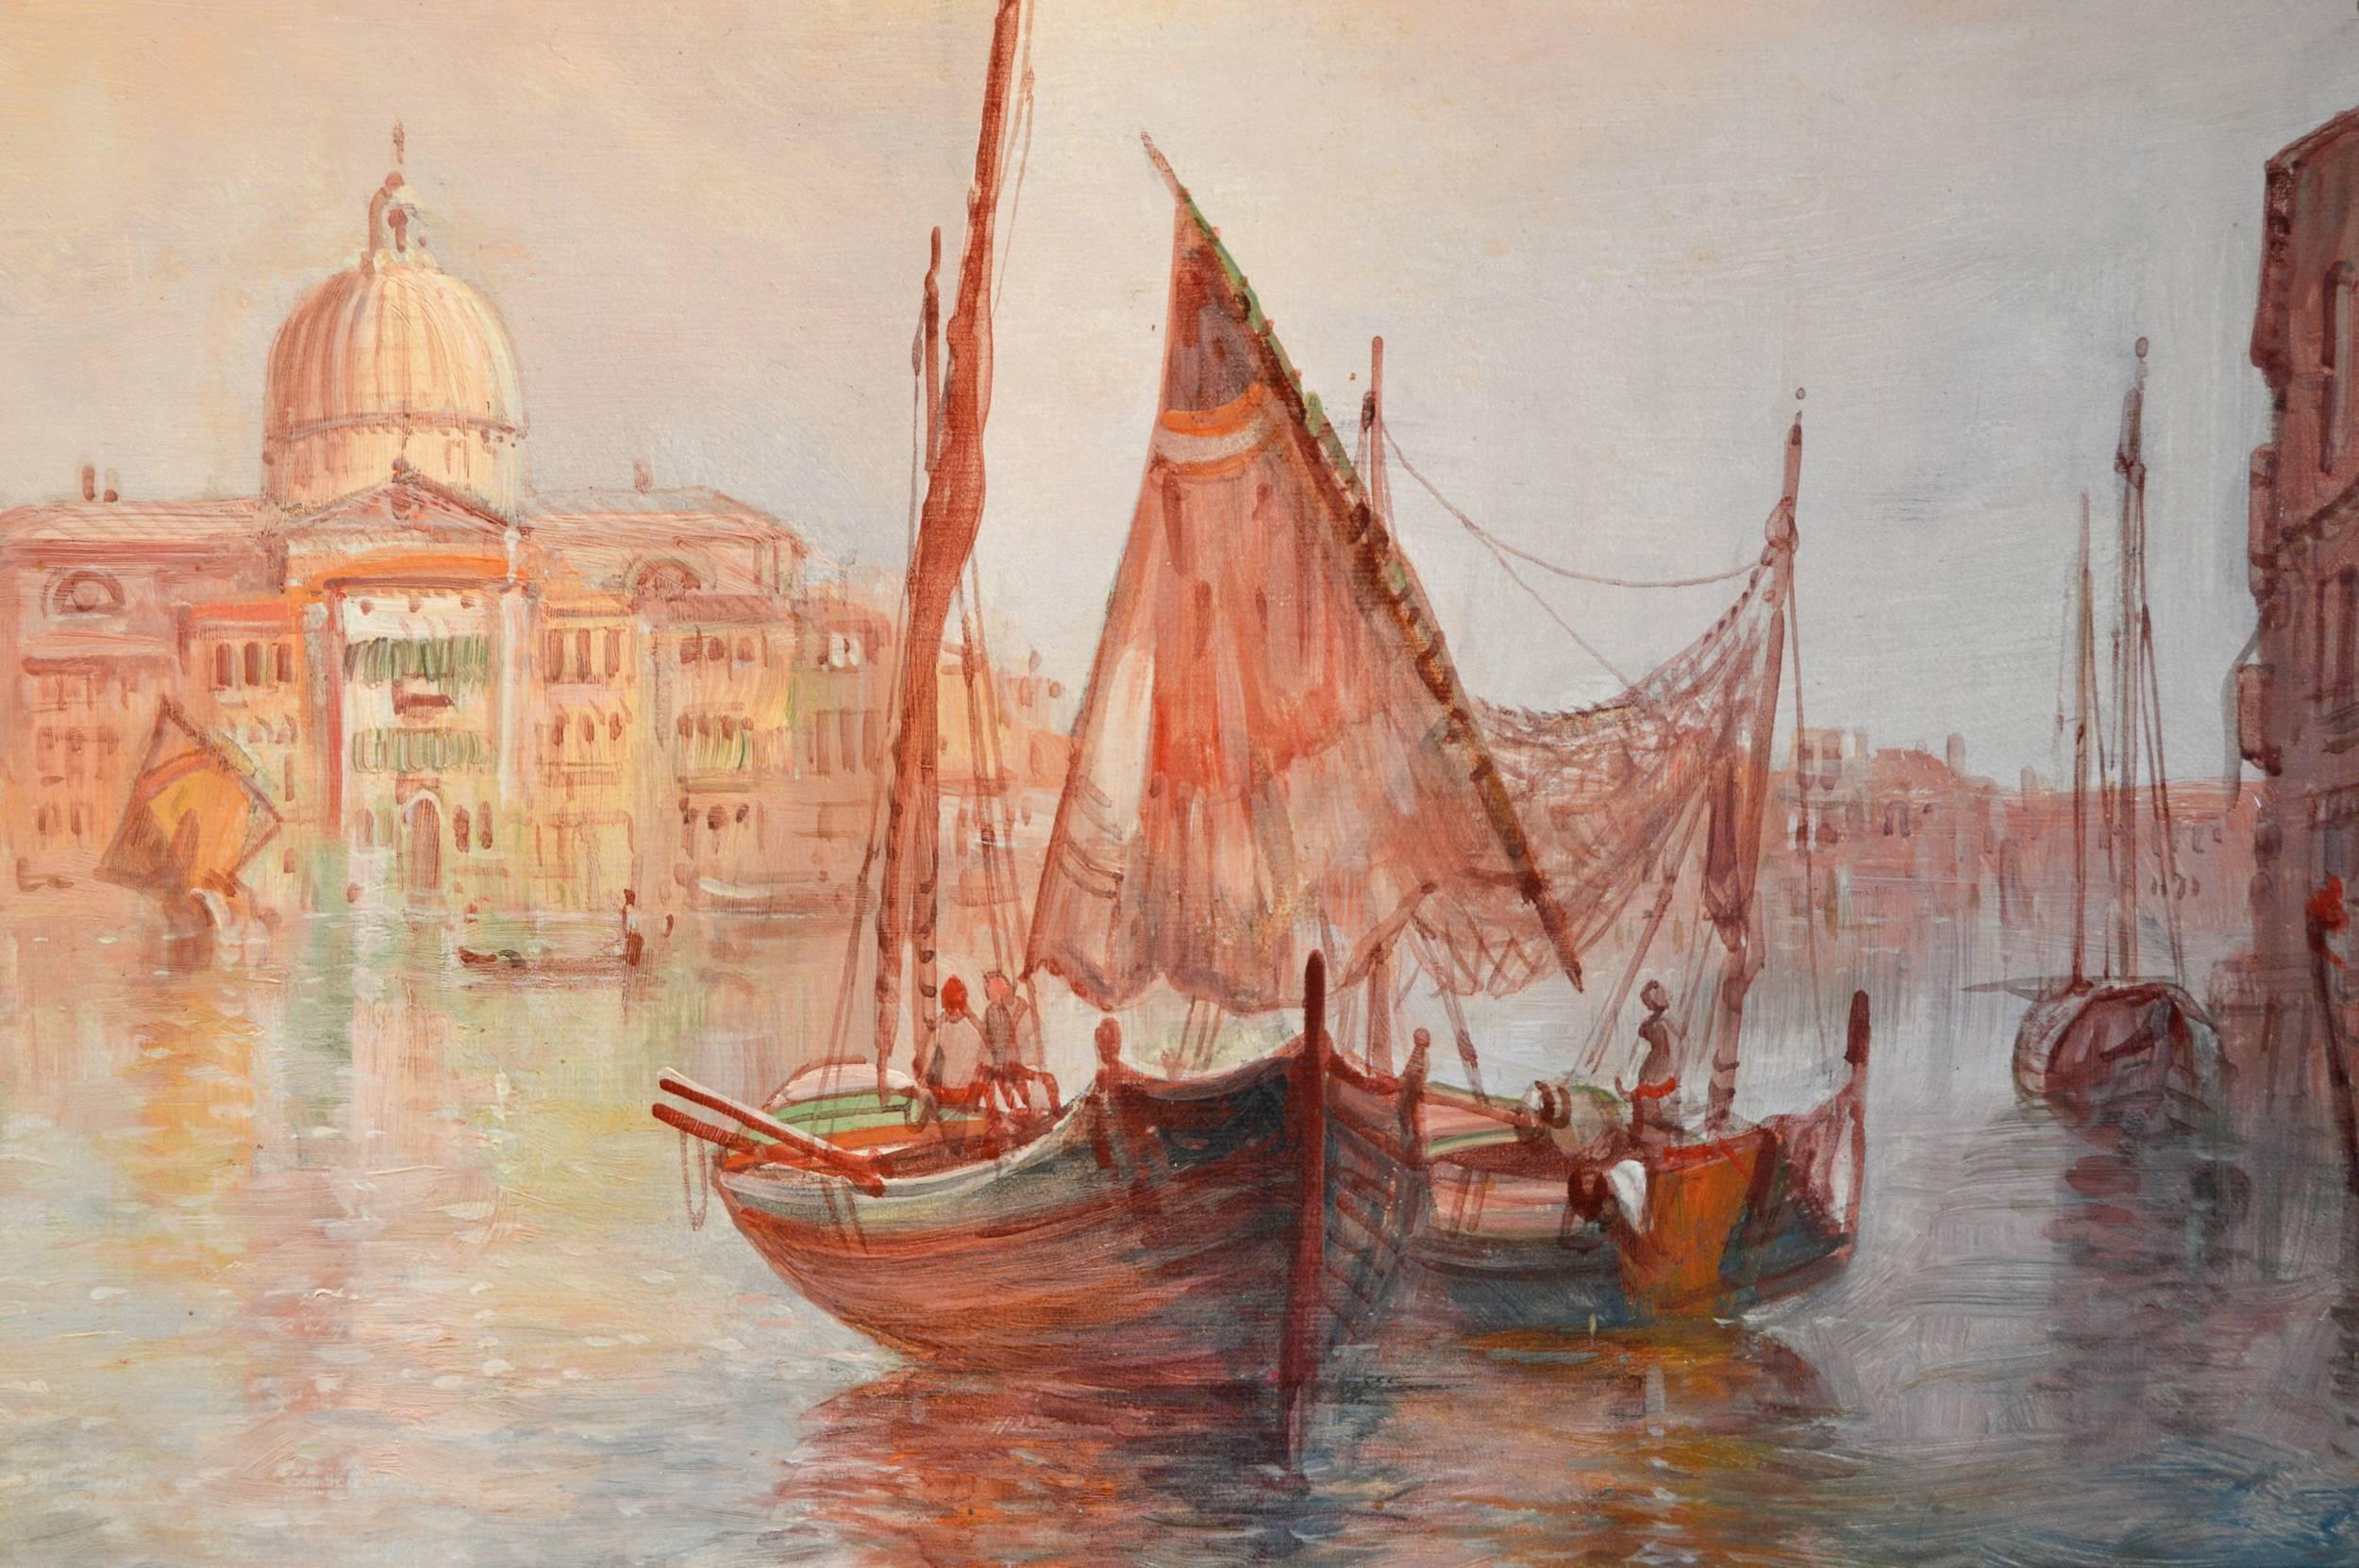 Saint Pietro Cantello, Venice, oil on canvas - Brown Landscape Painting by Alfred Pollentine